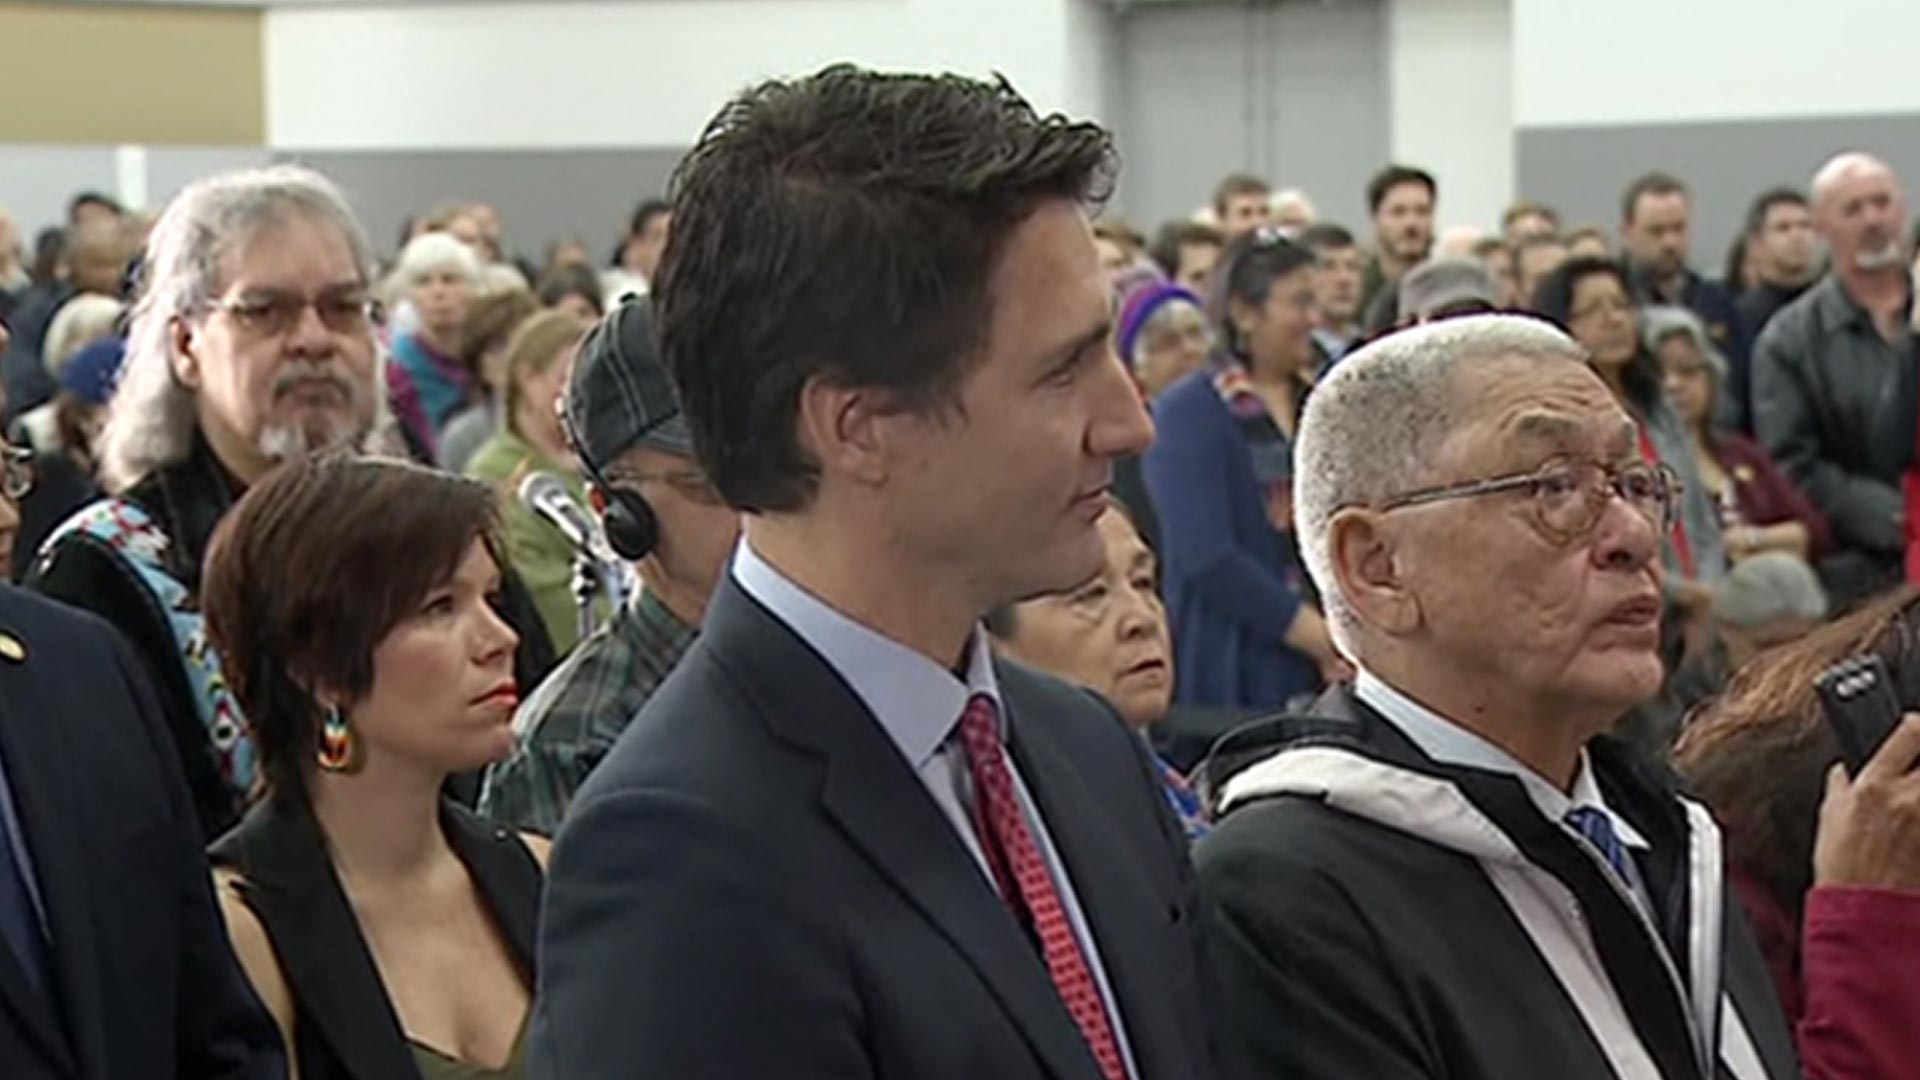 Prime Minister Justin Trudeau in the first row during ceremony unveiling Truth and Reconciliation Commission's final report into Indian residential schools. APTN/Photo